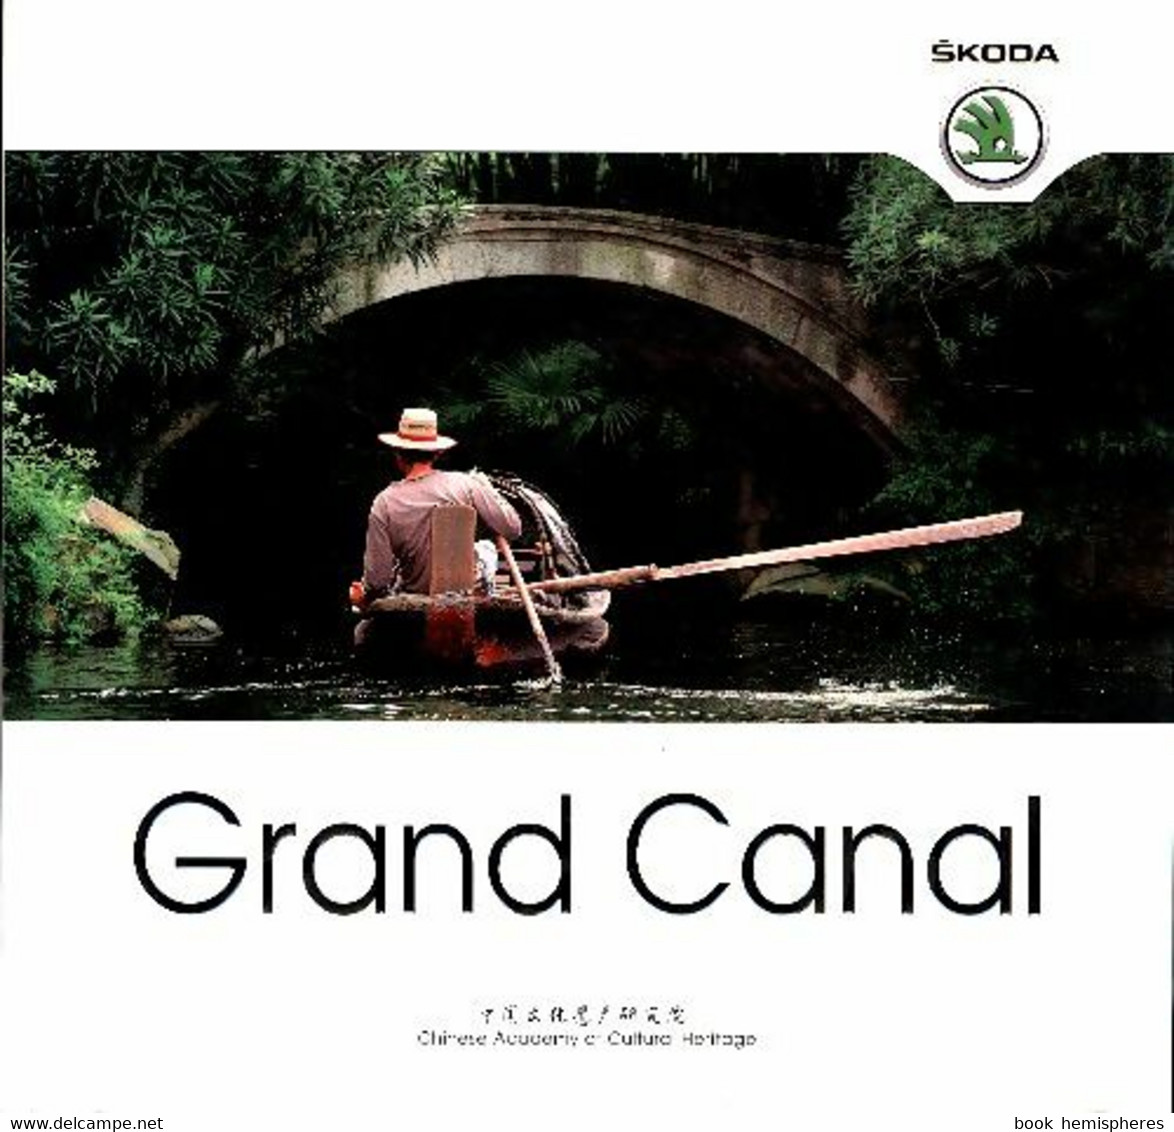 Grand Canal. Chinese Academy Of Cultural Heritage De Collectif (0) - Motorrad